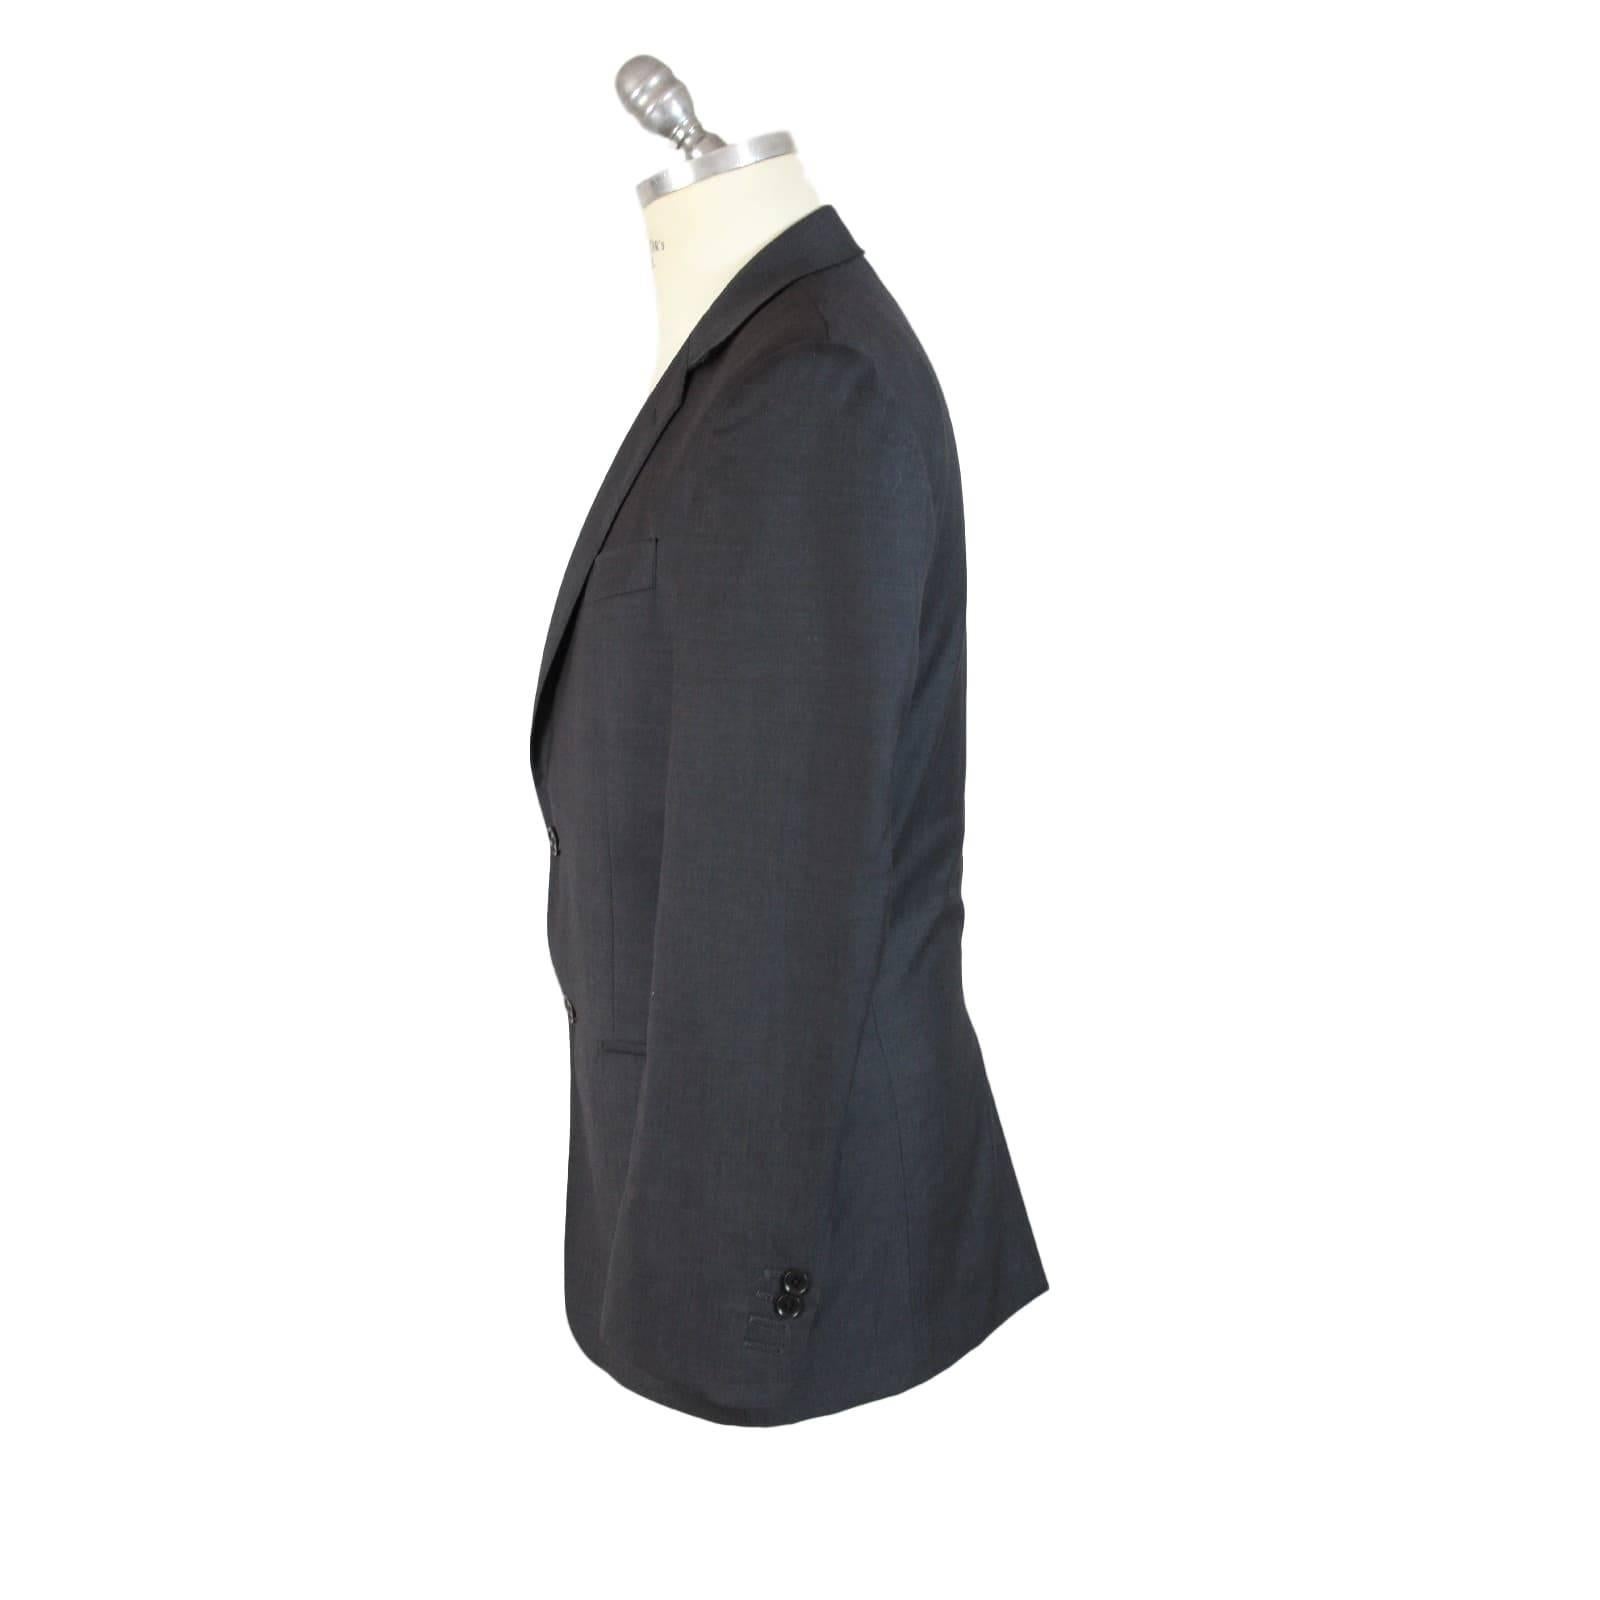 Elegant Pierre Balmain man’s elegant jacket and trouser size 48 wool Italian, the trousers are cut alive on the hem and can be shortened to the height. Excellent conditions.

Size: 48 it
Shoulder: 48 cm
Armpit to armpit: 52 cm
Length: 80 cm
Sleeves: